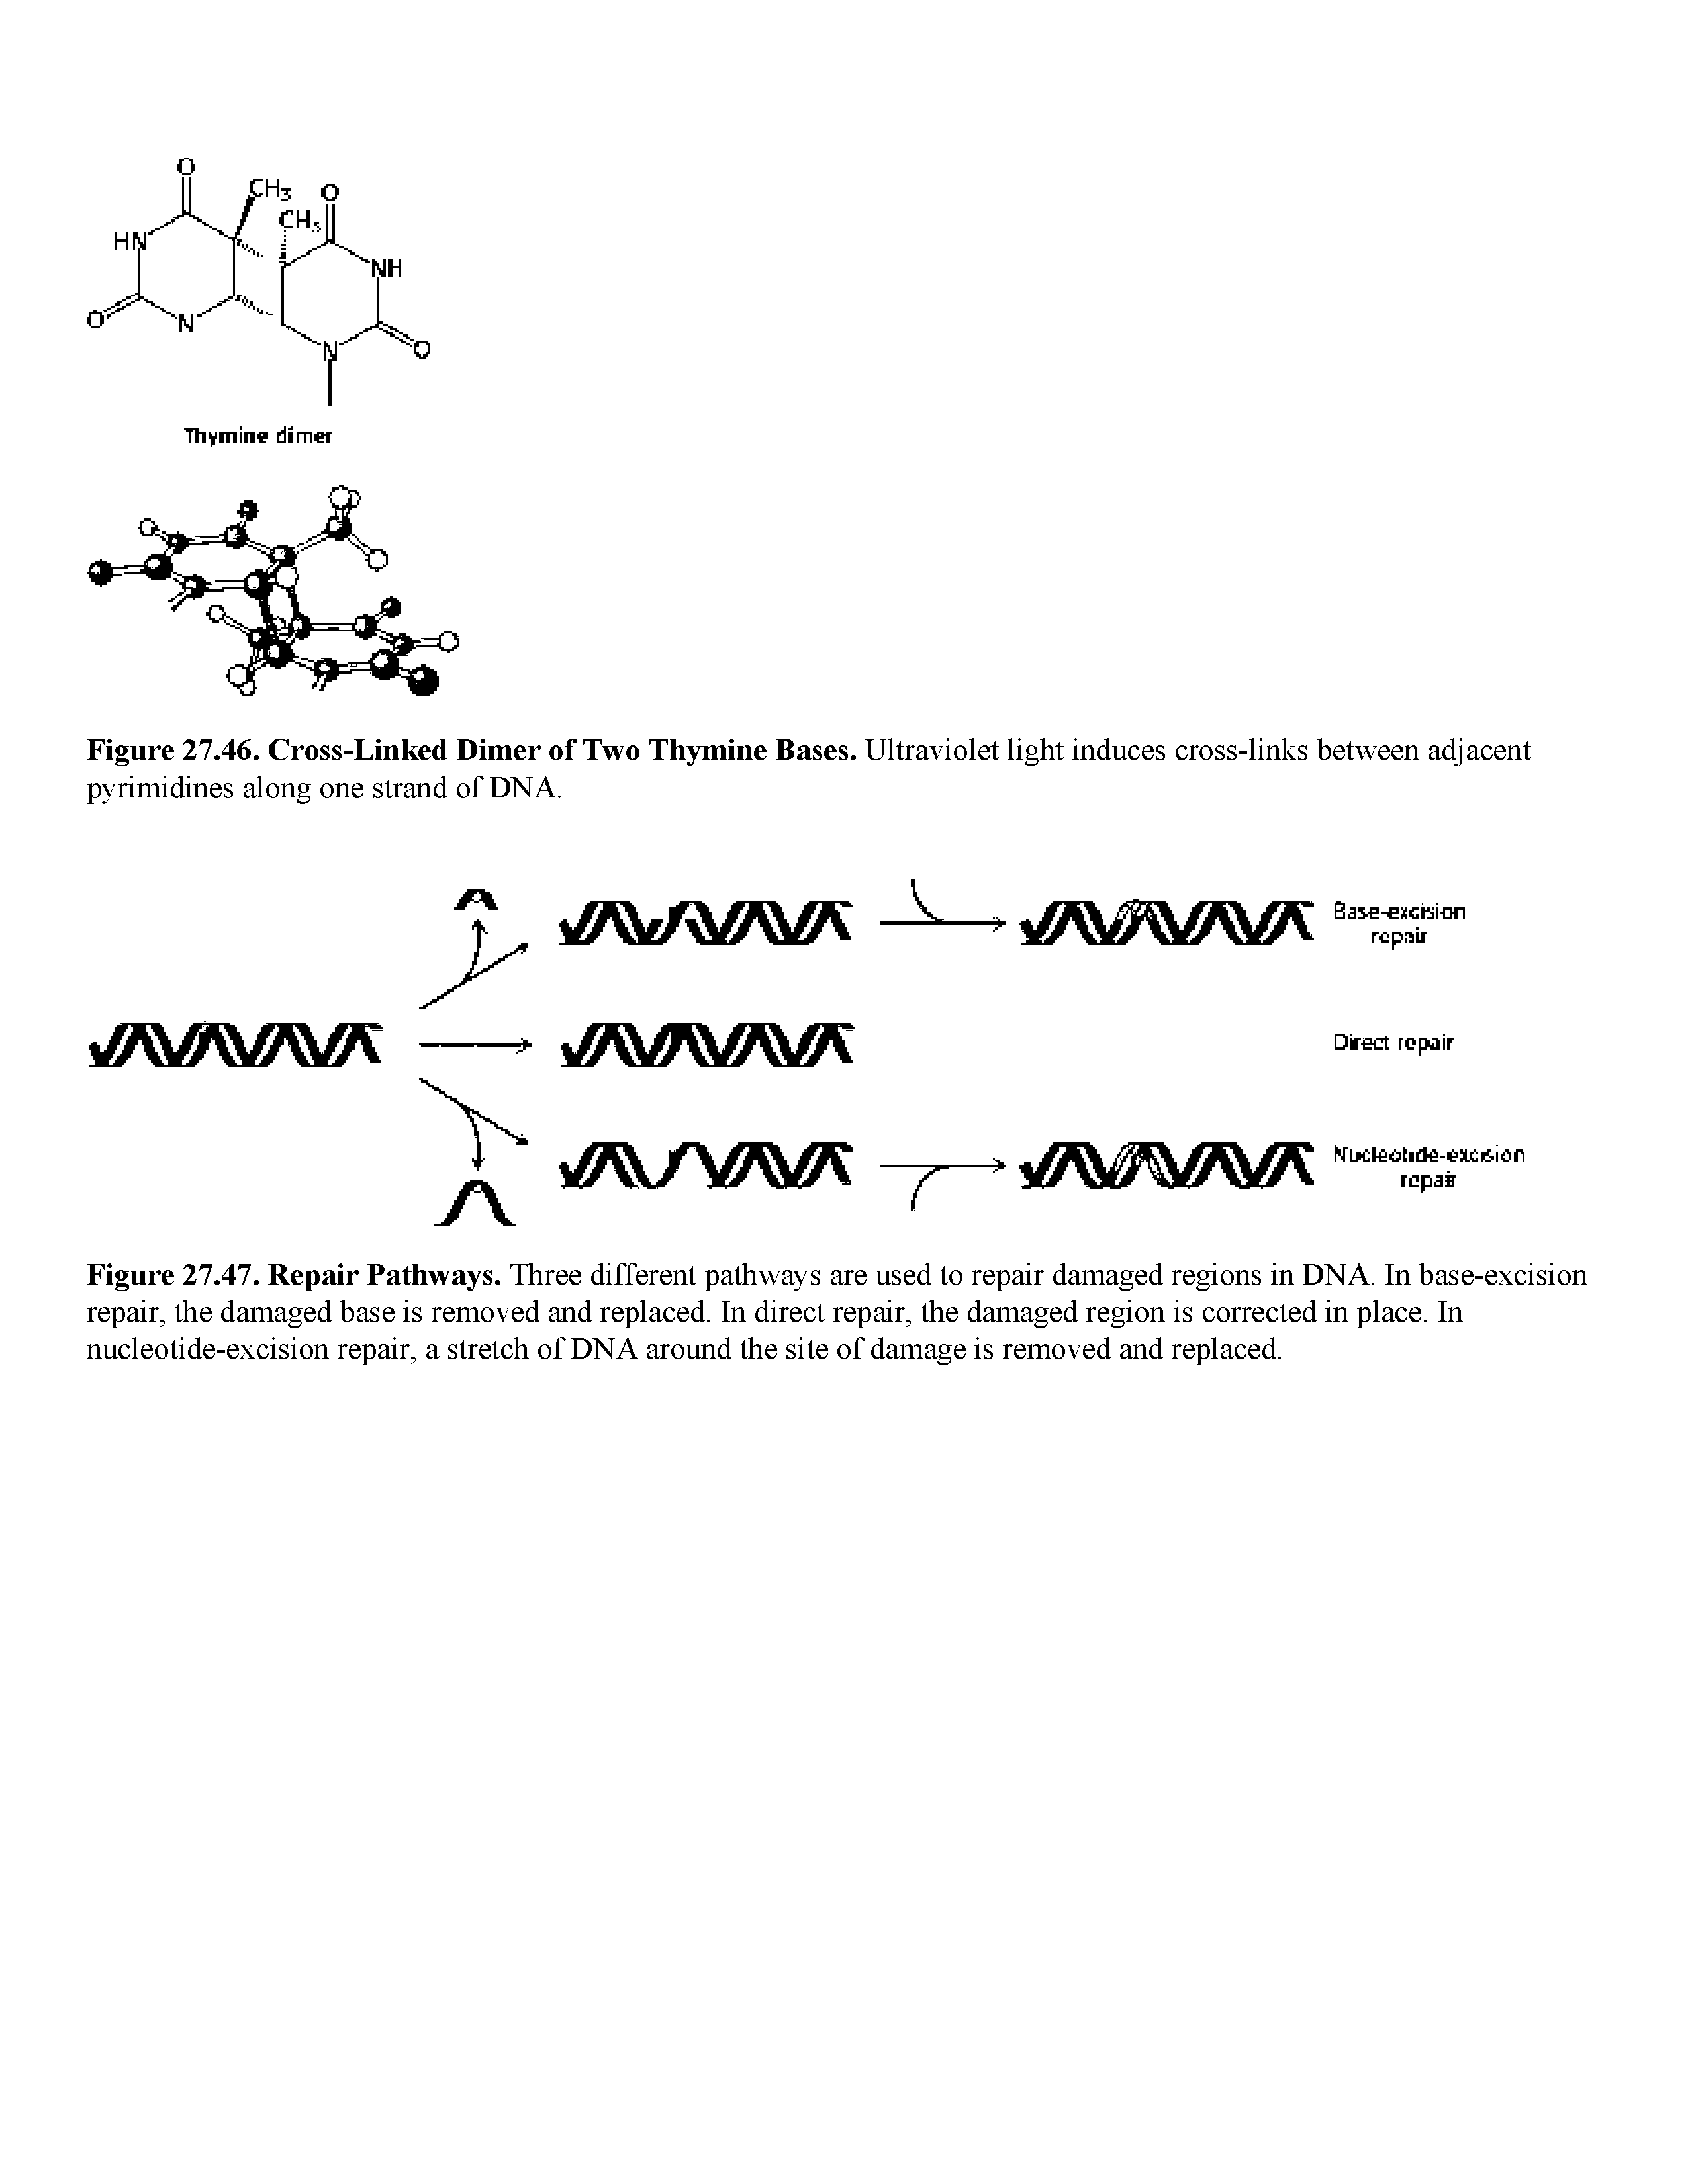 Figure 27.46. Cross-Linked Dimer of Two Thymine Bases. Ultraviolet light induces cross-links between adjacent pyrimidines along one strand of DNA.